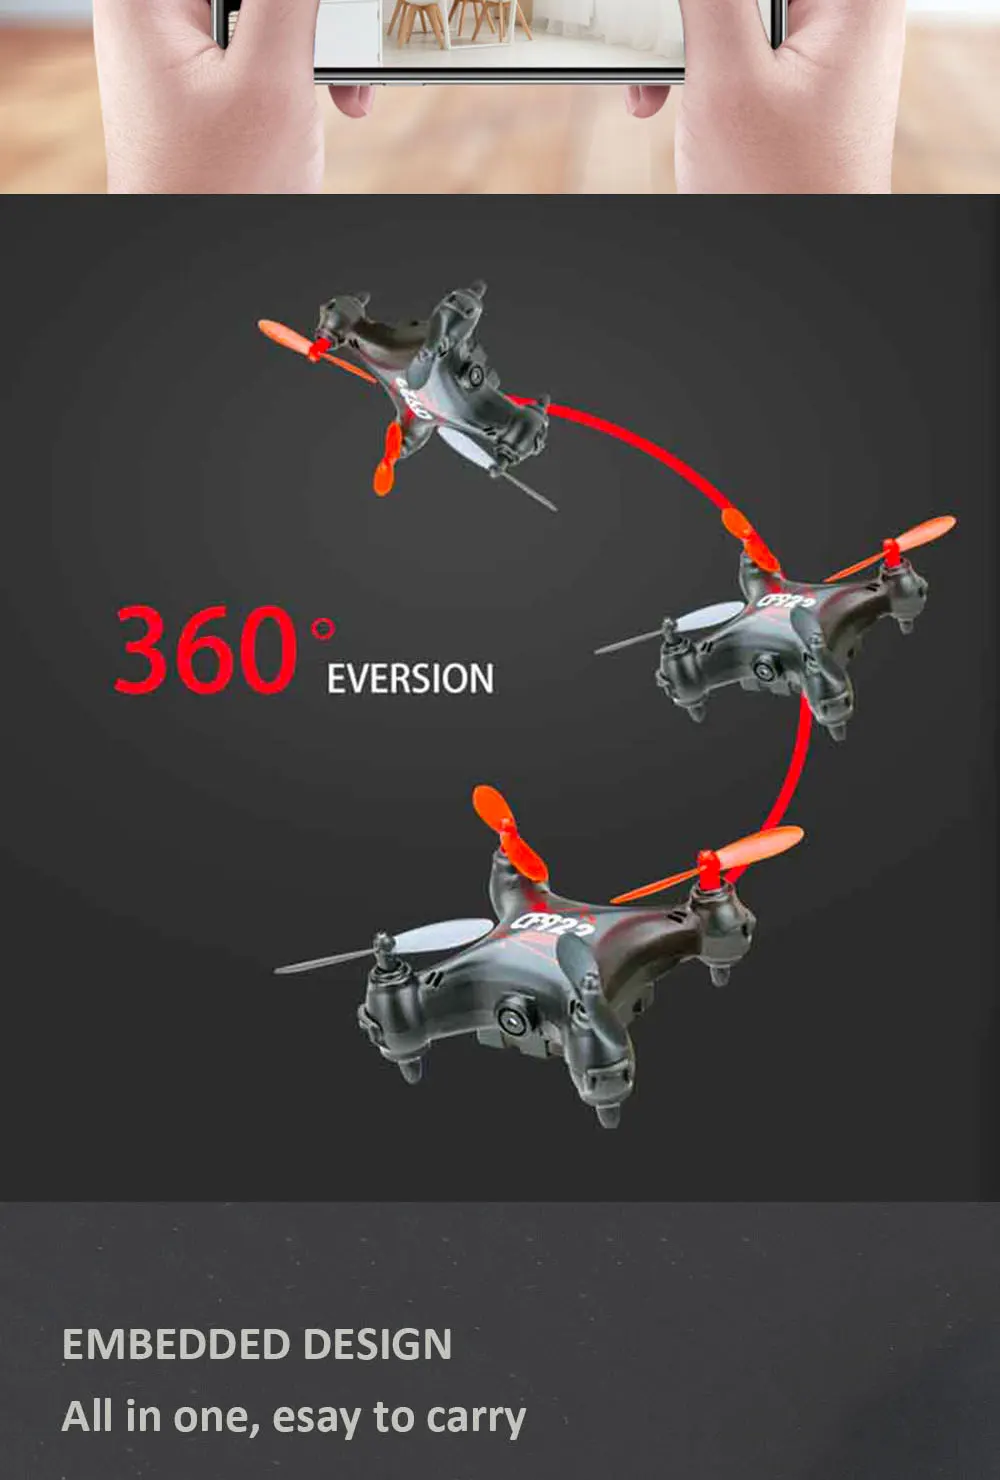 4K RC Drone With Camera HD Mini Foldable Dron FPV Wifi Drones Professional Quadcopter Hold Mode Dual Cameras Boy Toys